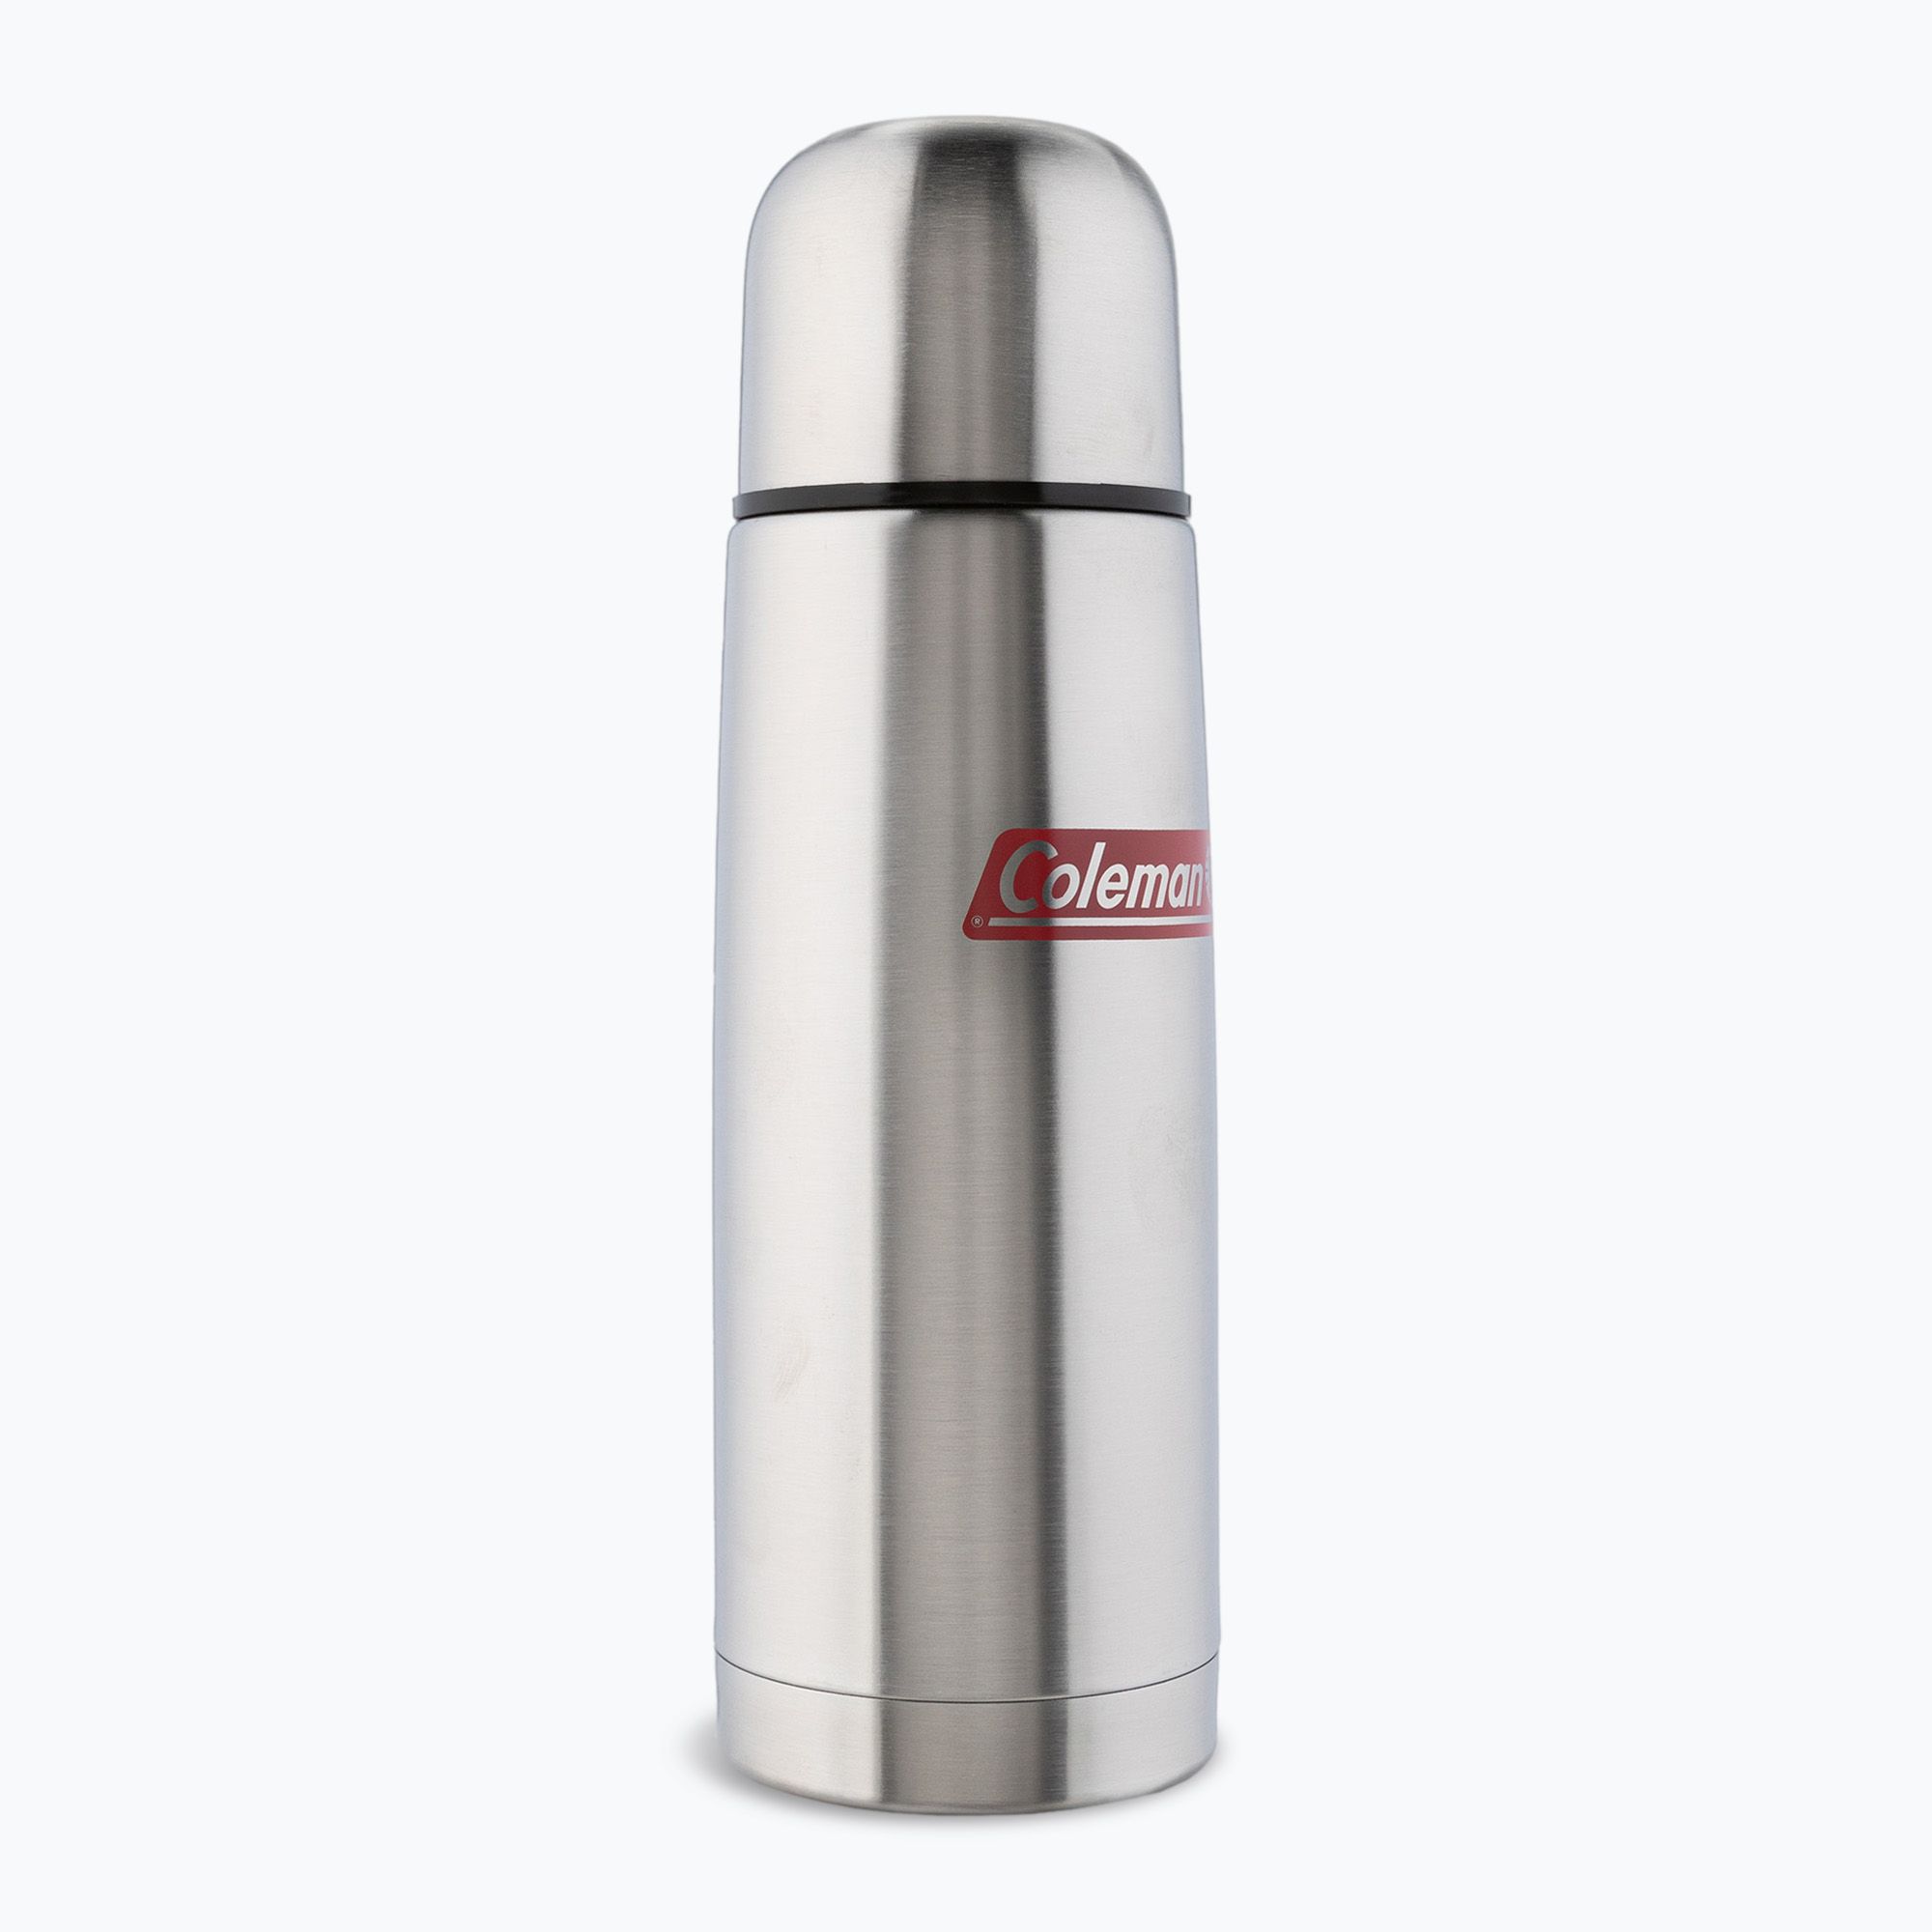 https://sportano.com/img/986c30c27a3d26a3ee16c136f92f4ff5/3/1/3138522045074_20-jpg/coleman-thermos-silver-204507-0.jpg